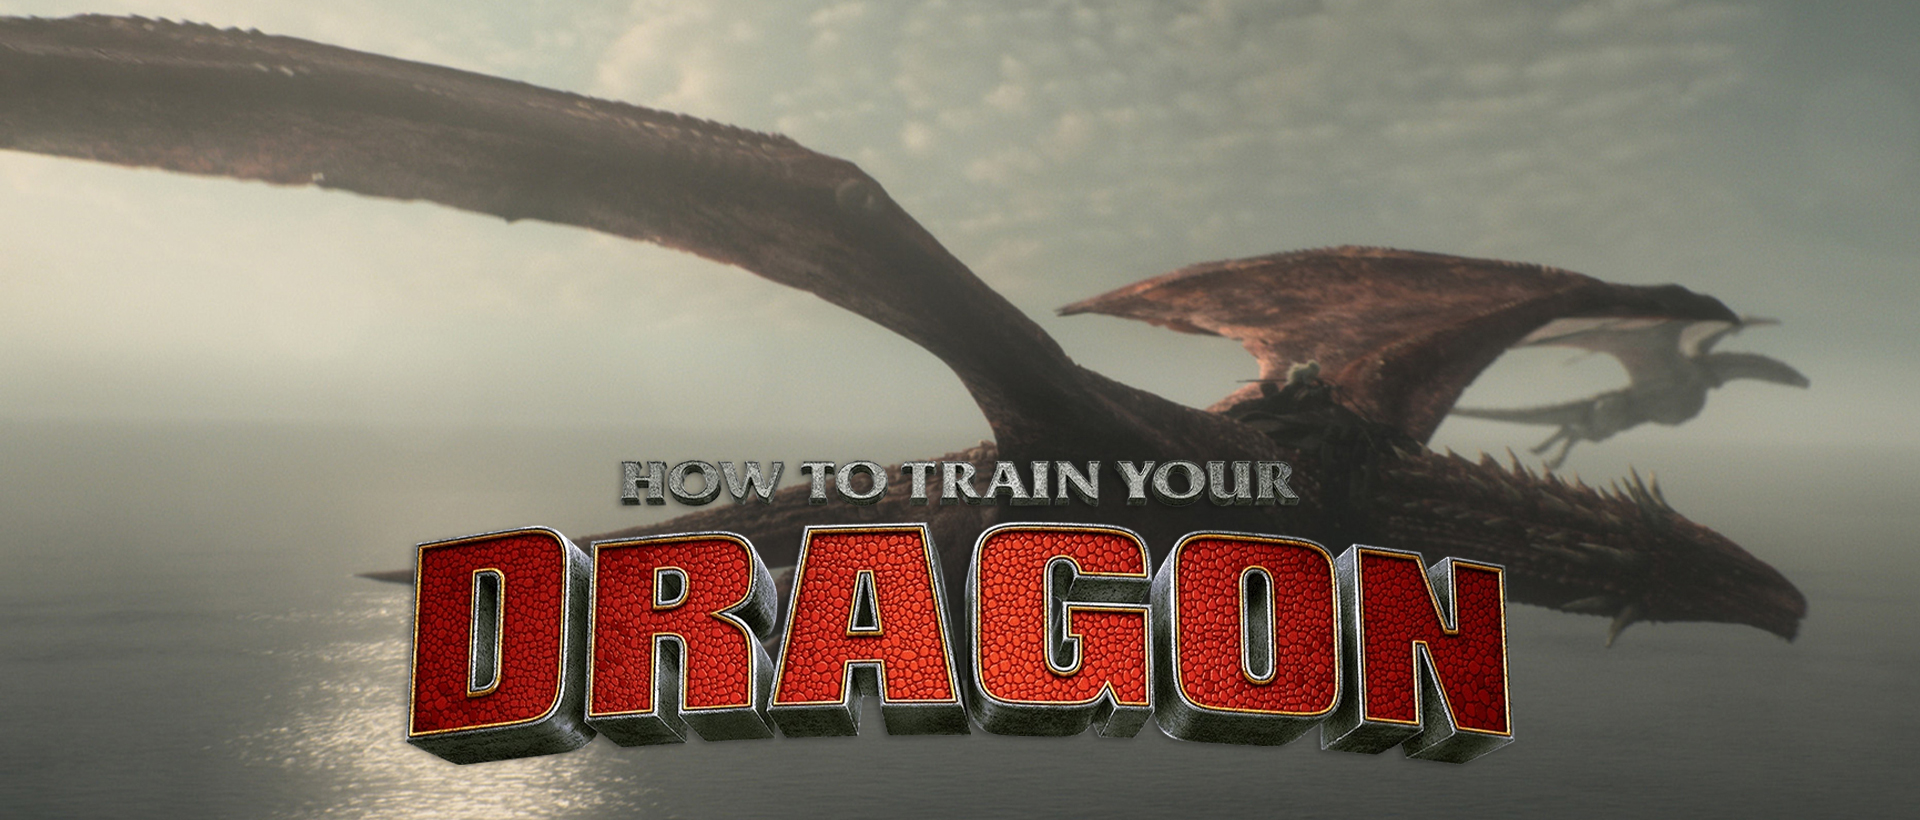 universal pictures how to train your dragon banner